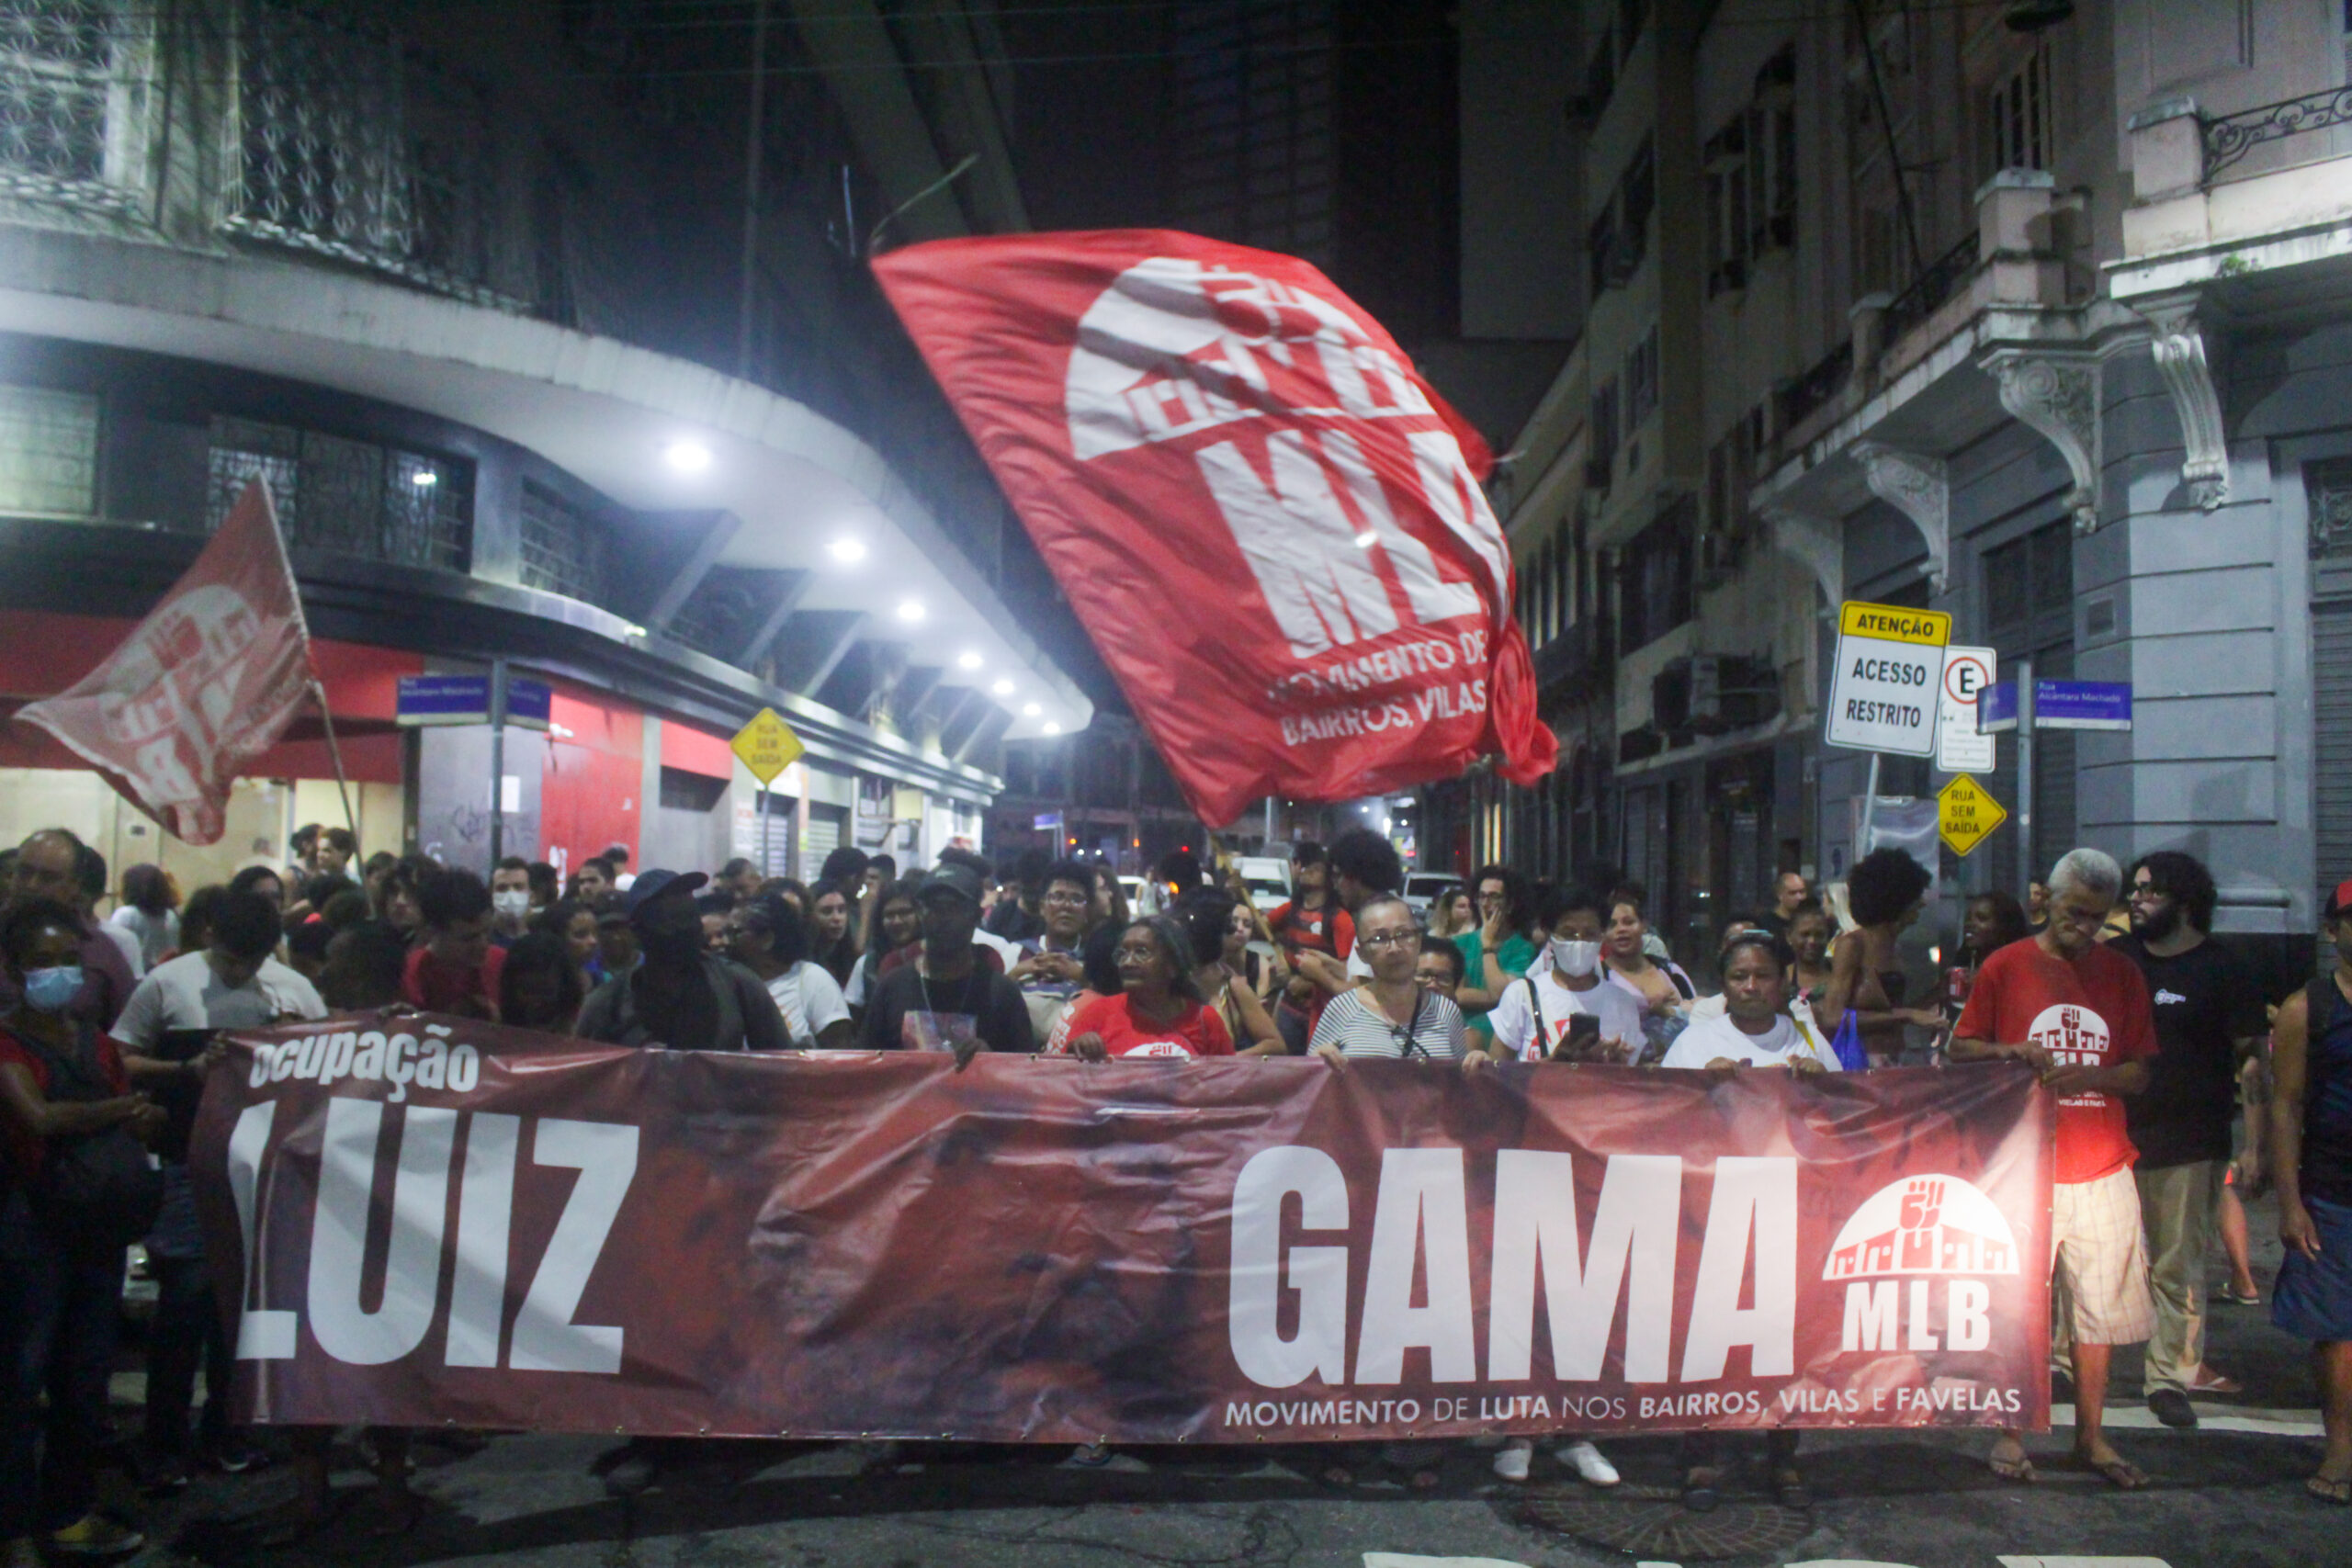 Following the eviction, residents from the Luiz Gama Occupation protested for the right to housing on the streets of downtown Rio. Photo: Vinícius Ribeiro